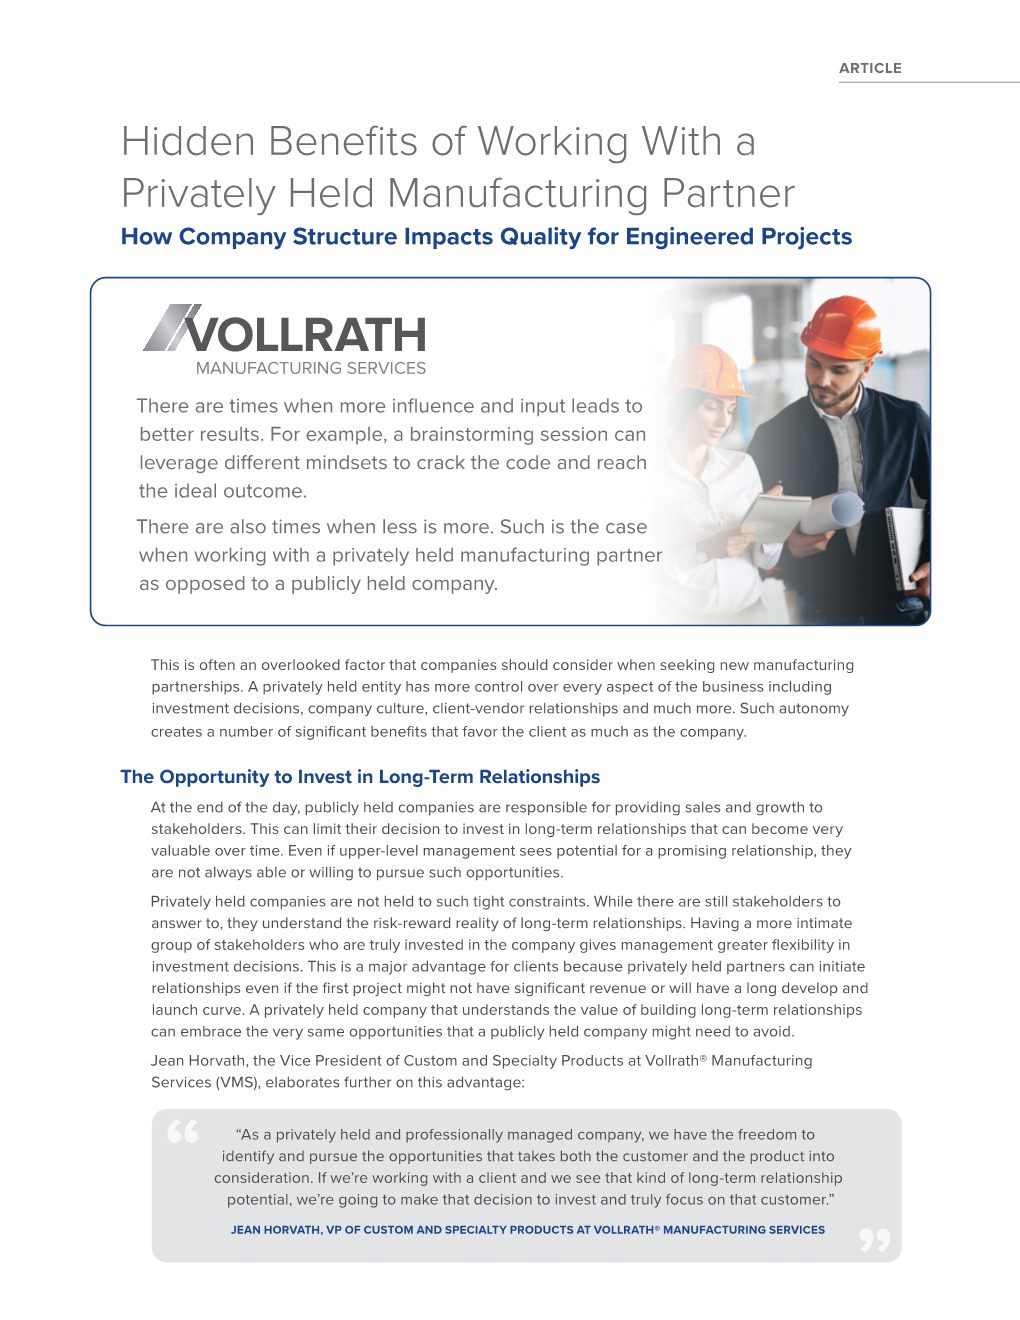 Hidden Benefits of Working with a Privately Held Manufacturing Partner How Company Structure Impacts Quality for Engineered Projects